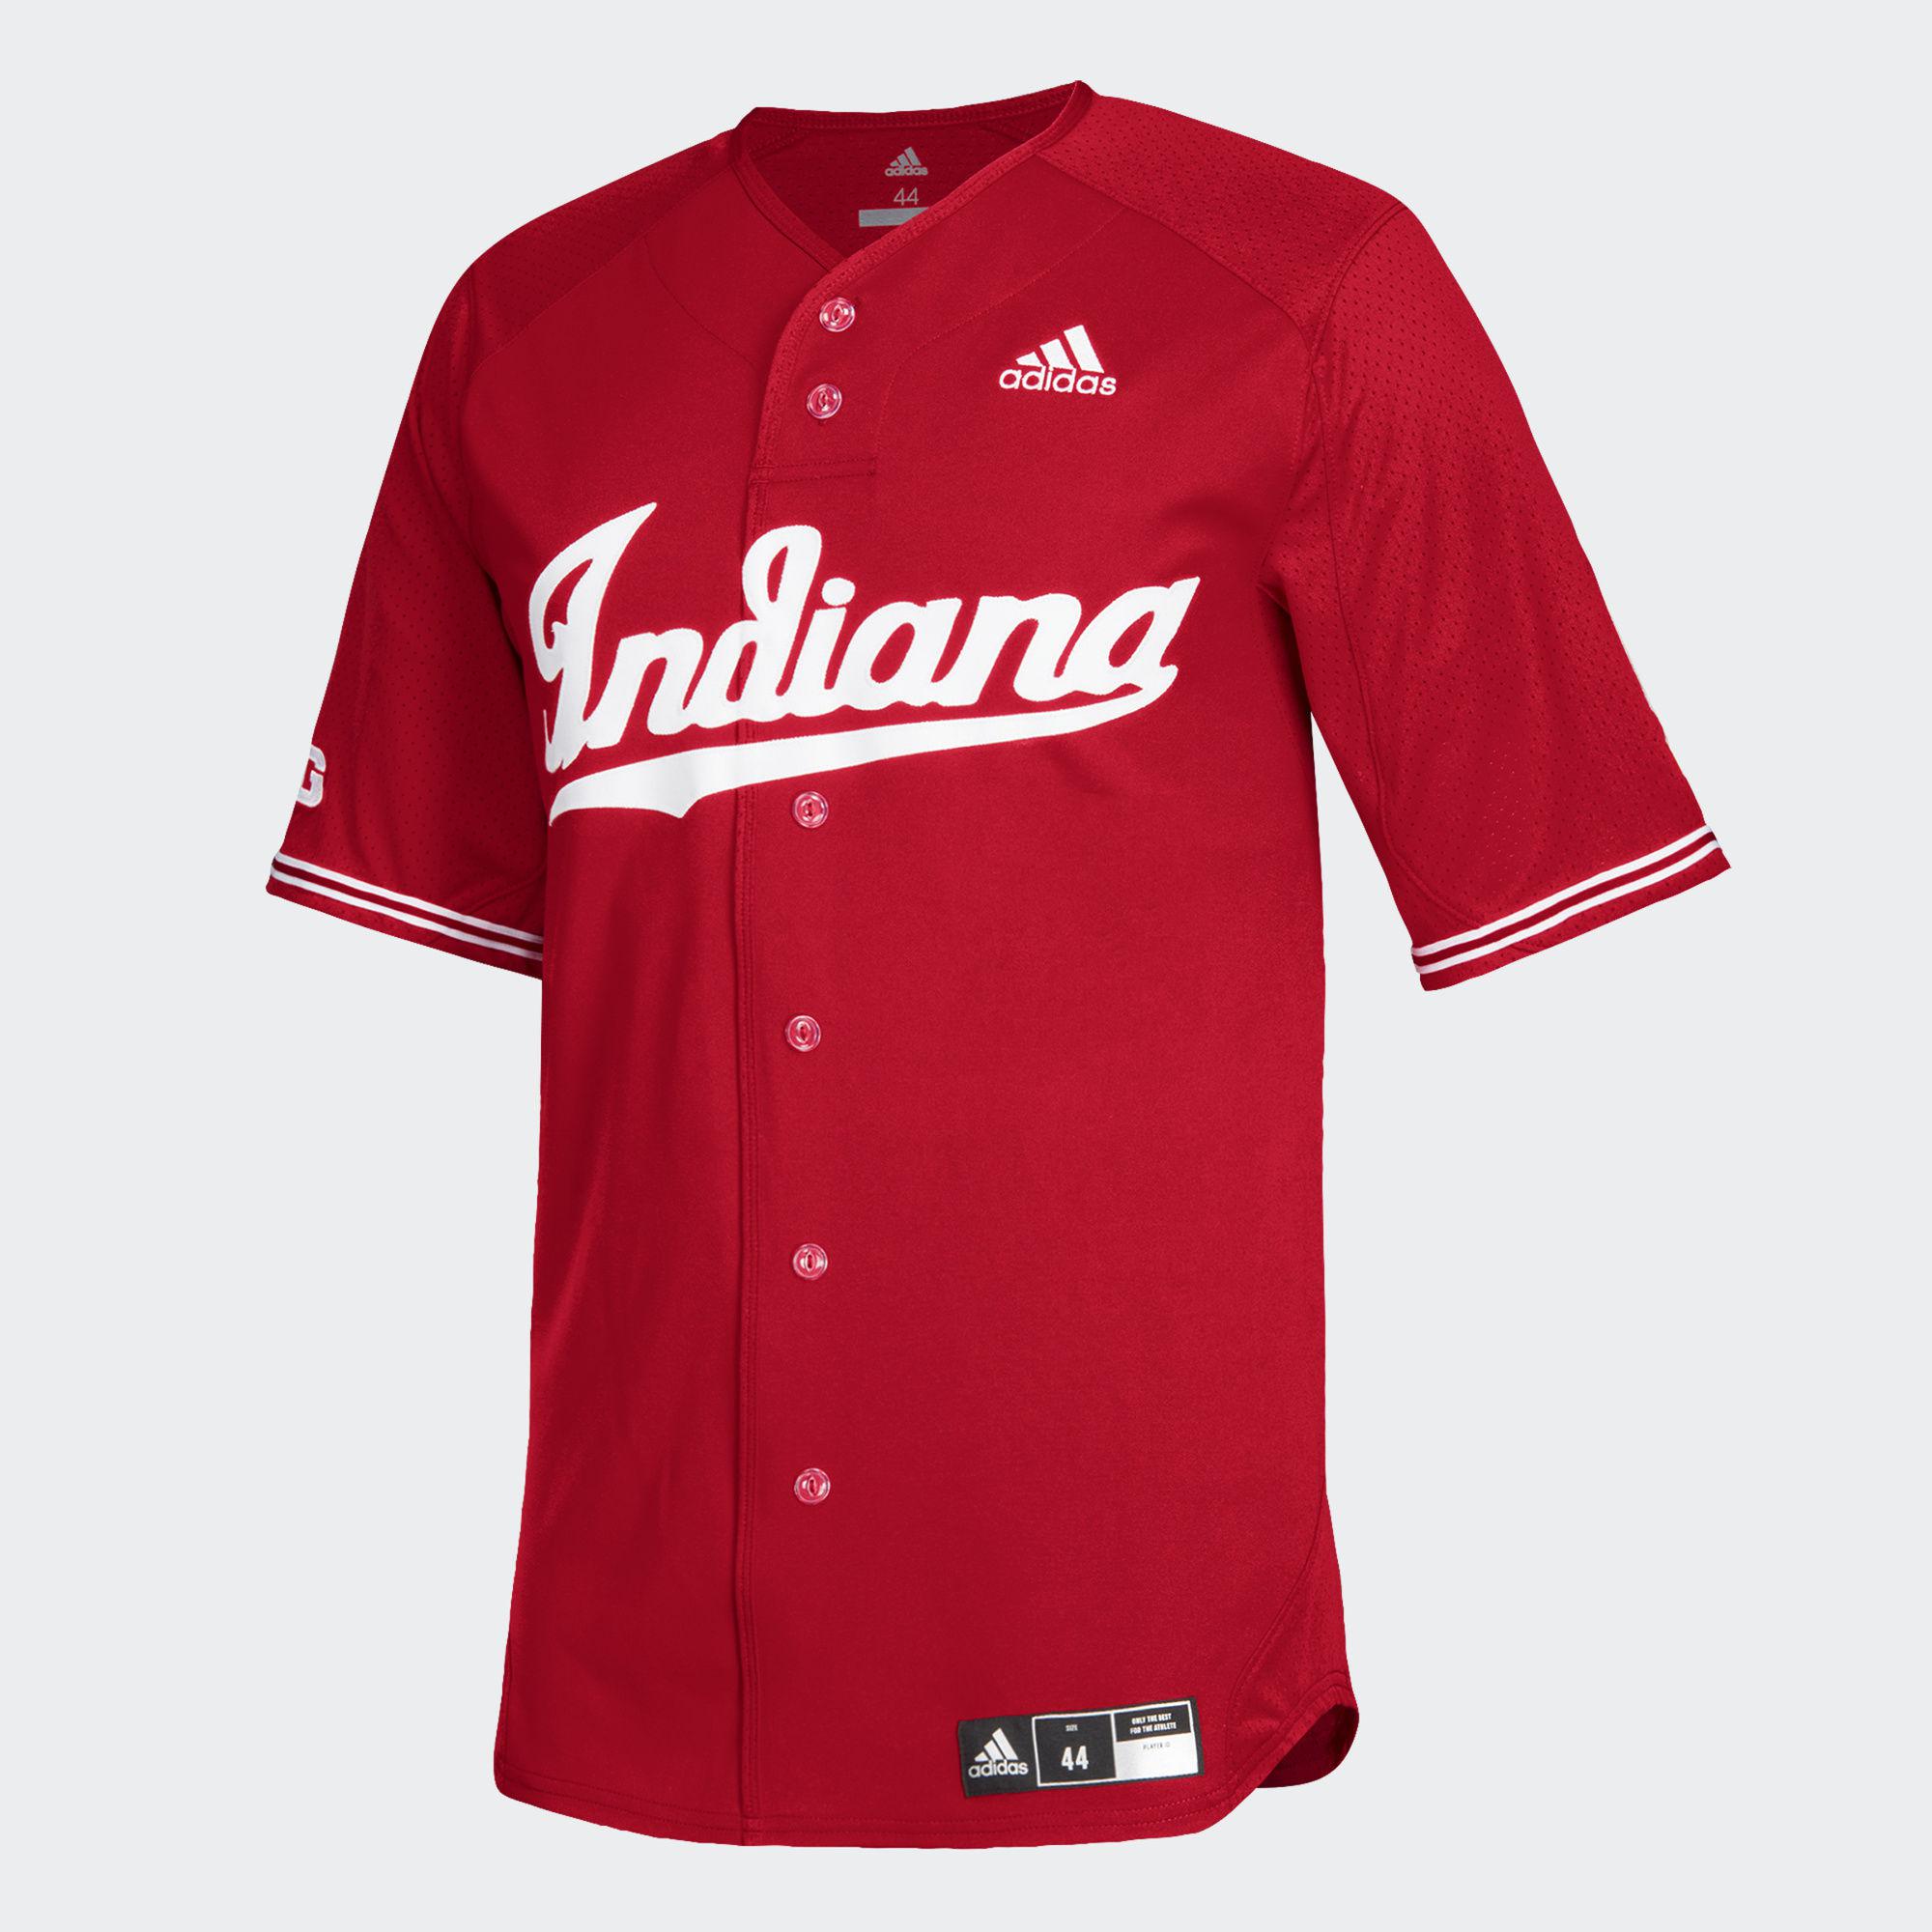 adidas Baseball Jersey Indiana in Red for Men - Lyst